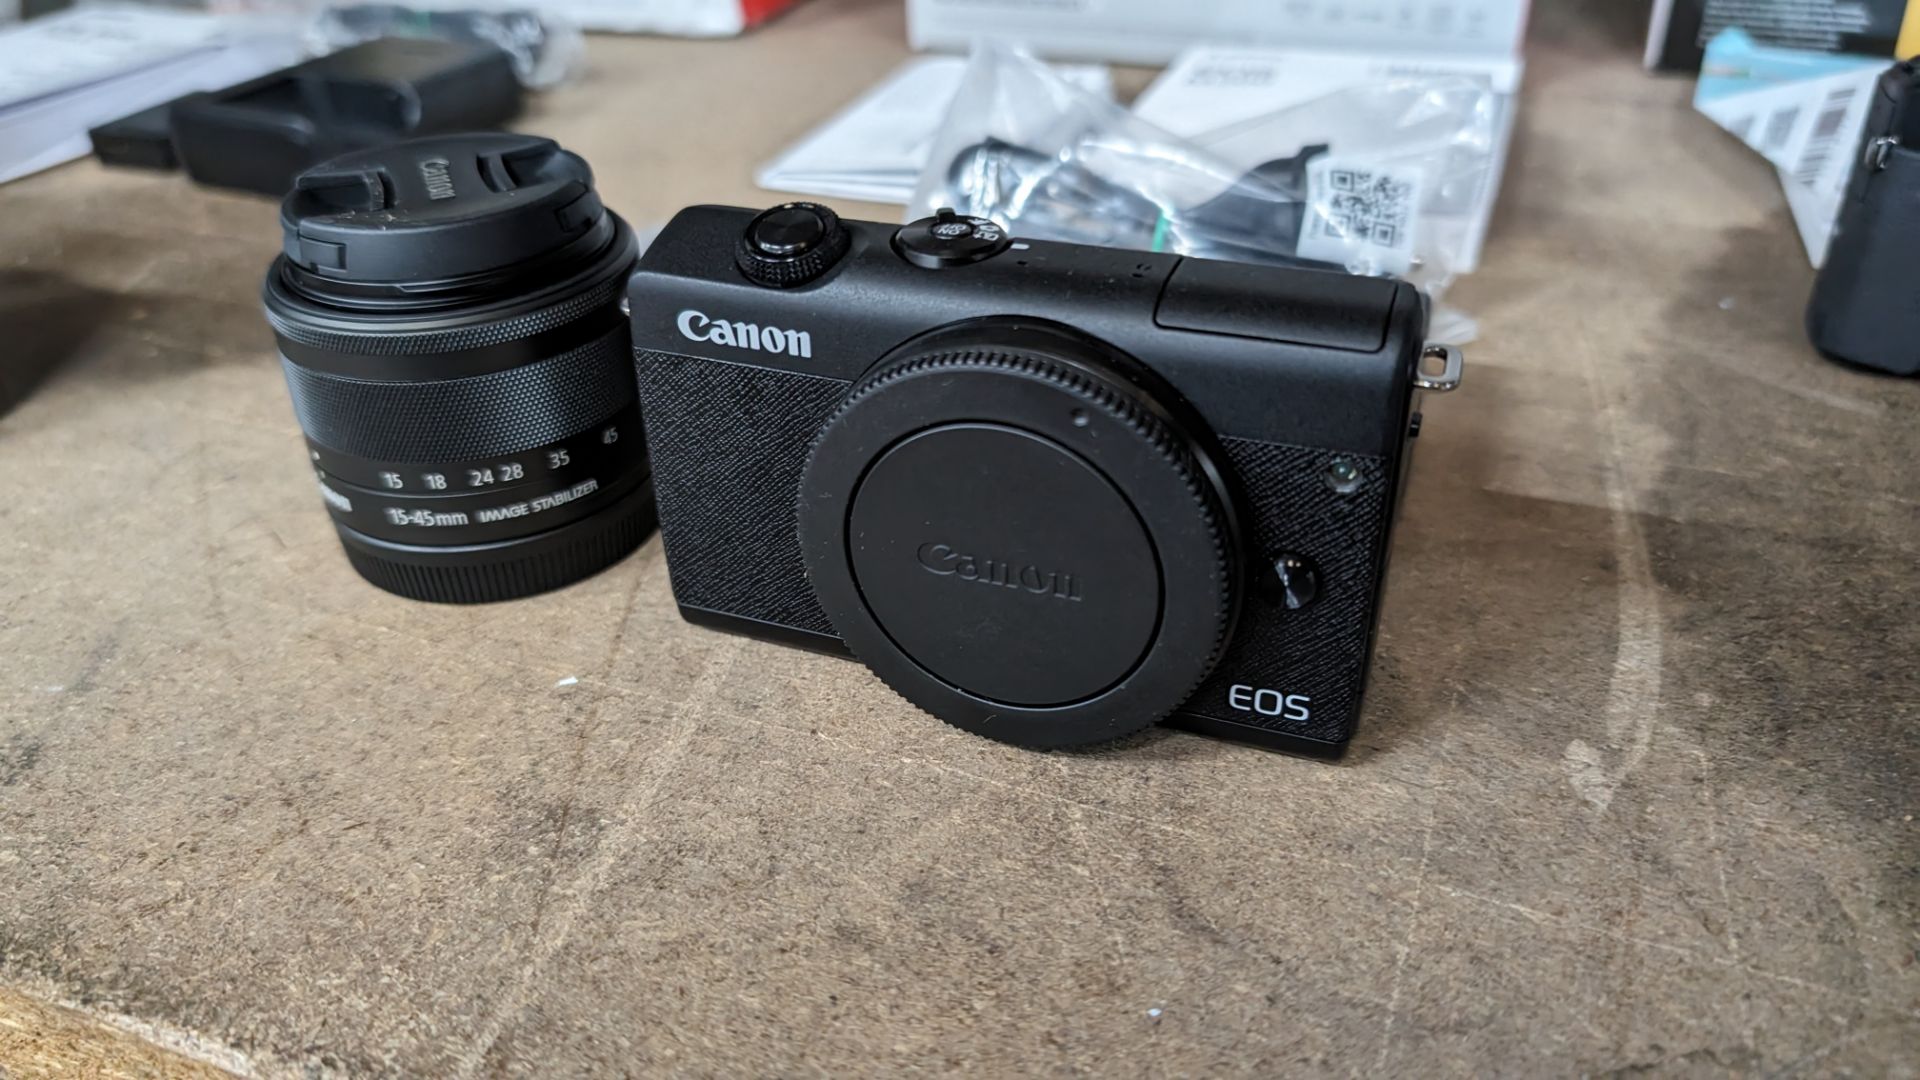 Canon EOS M200 camera kit, including 15-45mm image stabilizer lens, plus battery and charger - Image 5 of 12